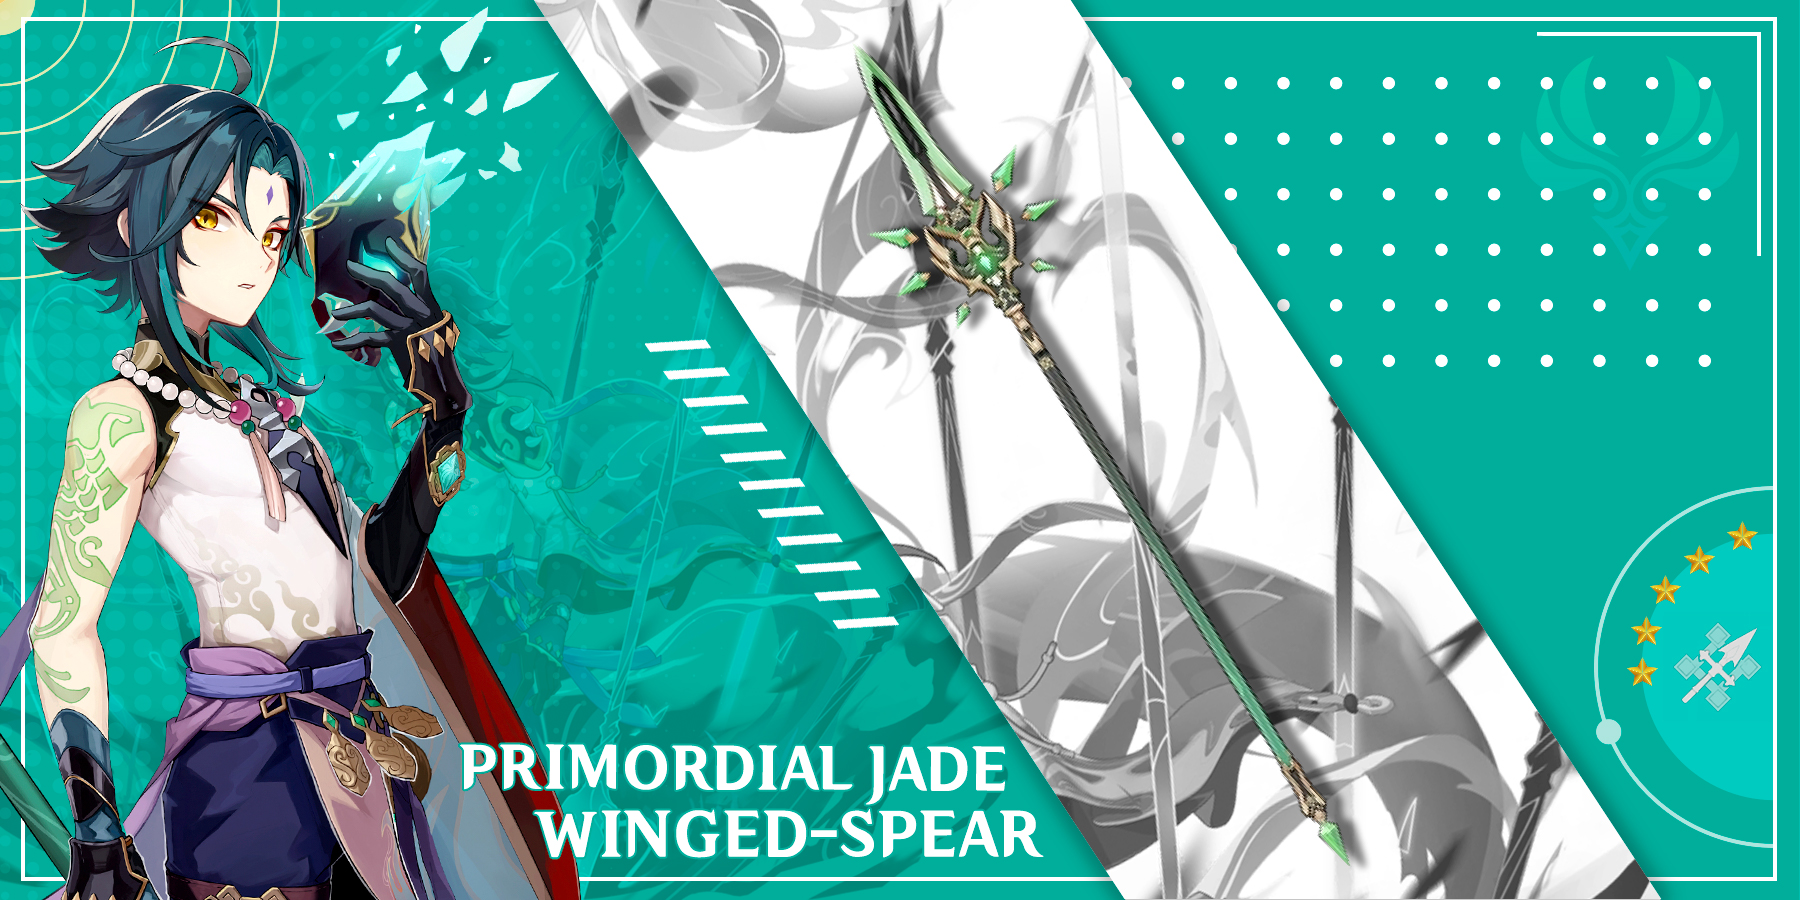 xiao-using-primordial-jade-winged-spear-in-genshin-impact